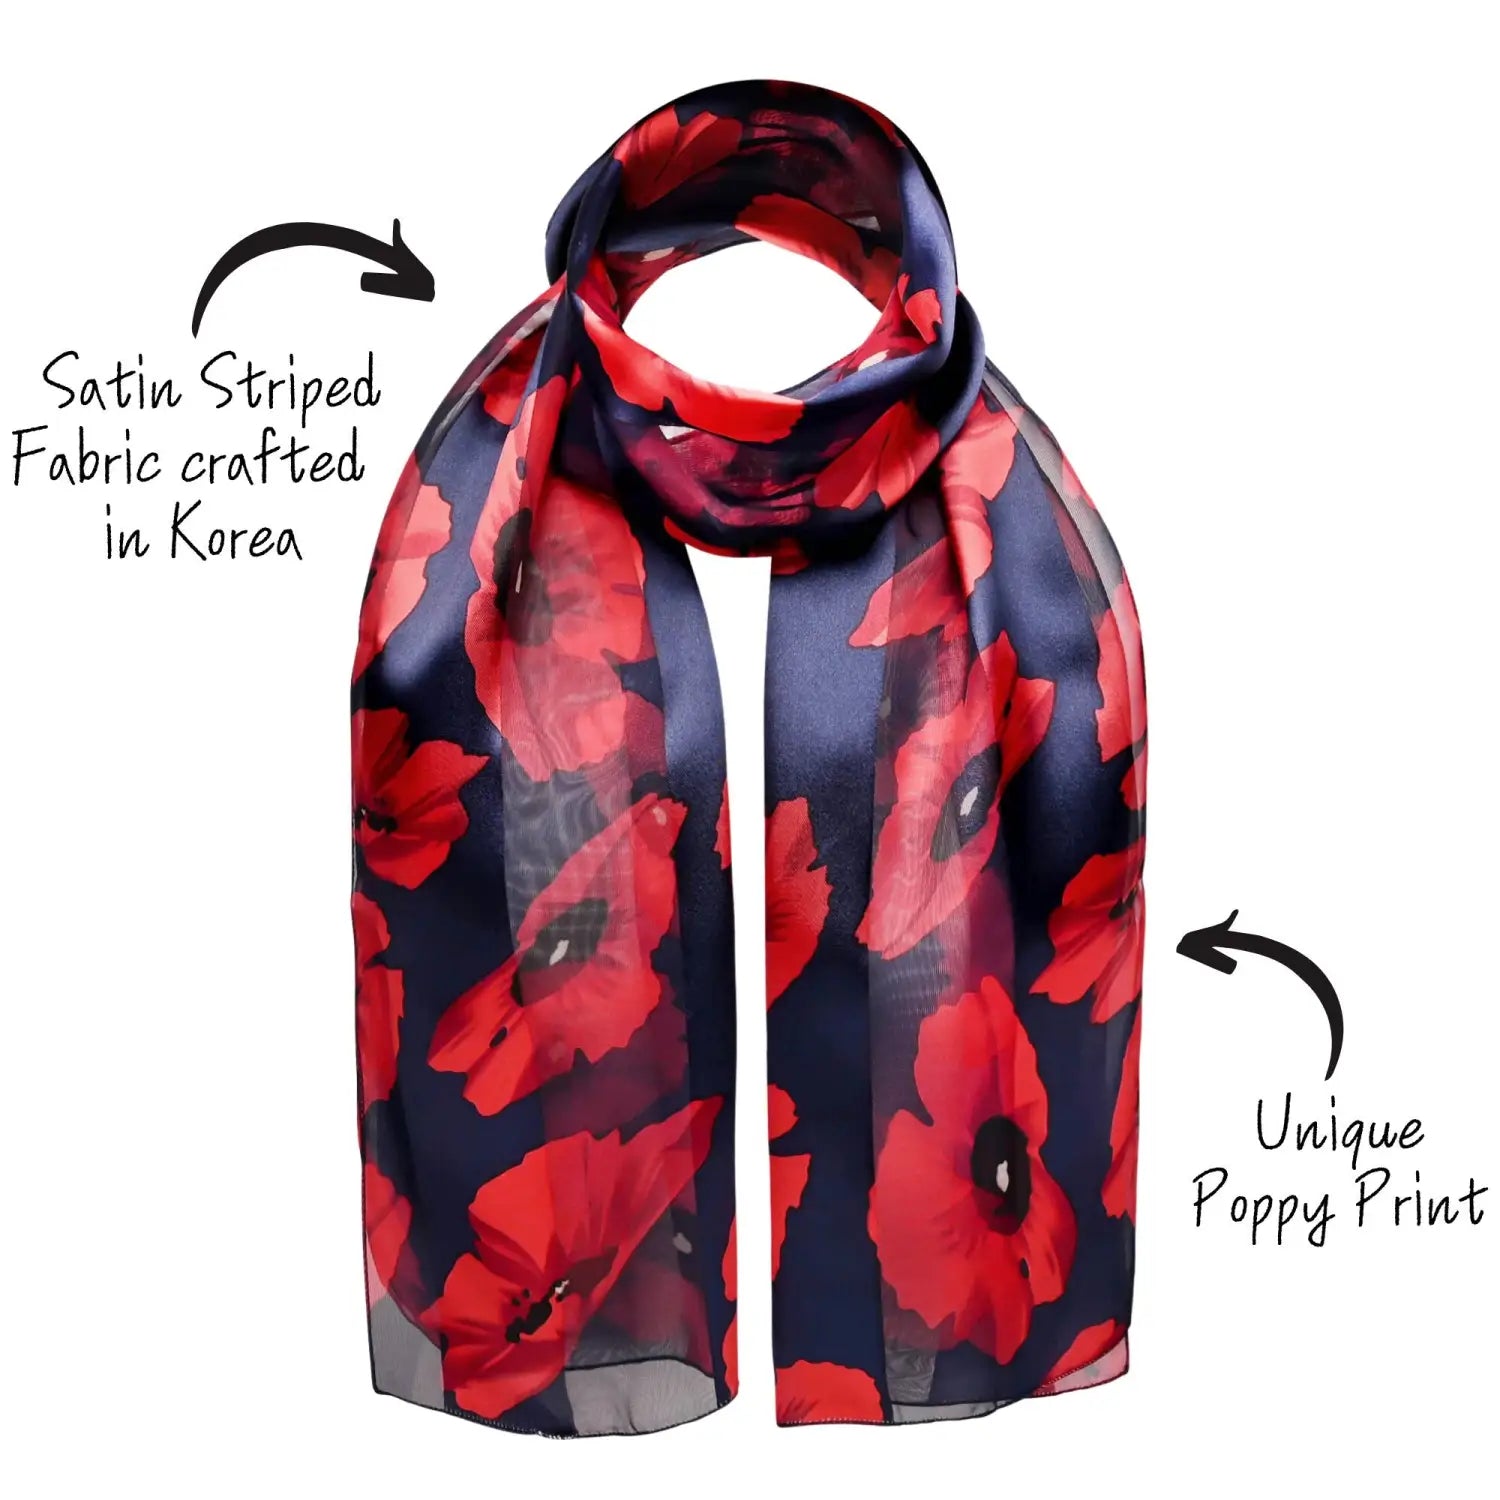 Poppy floral print scarf with red flowers design